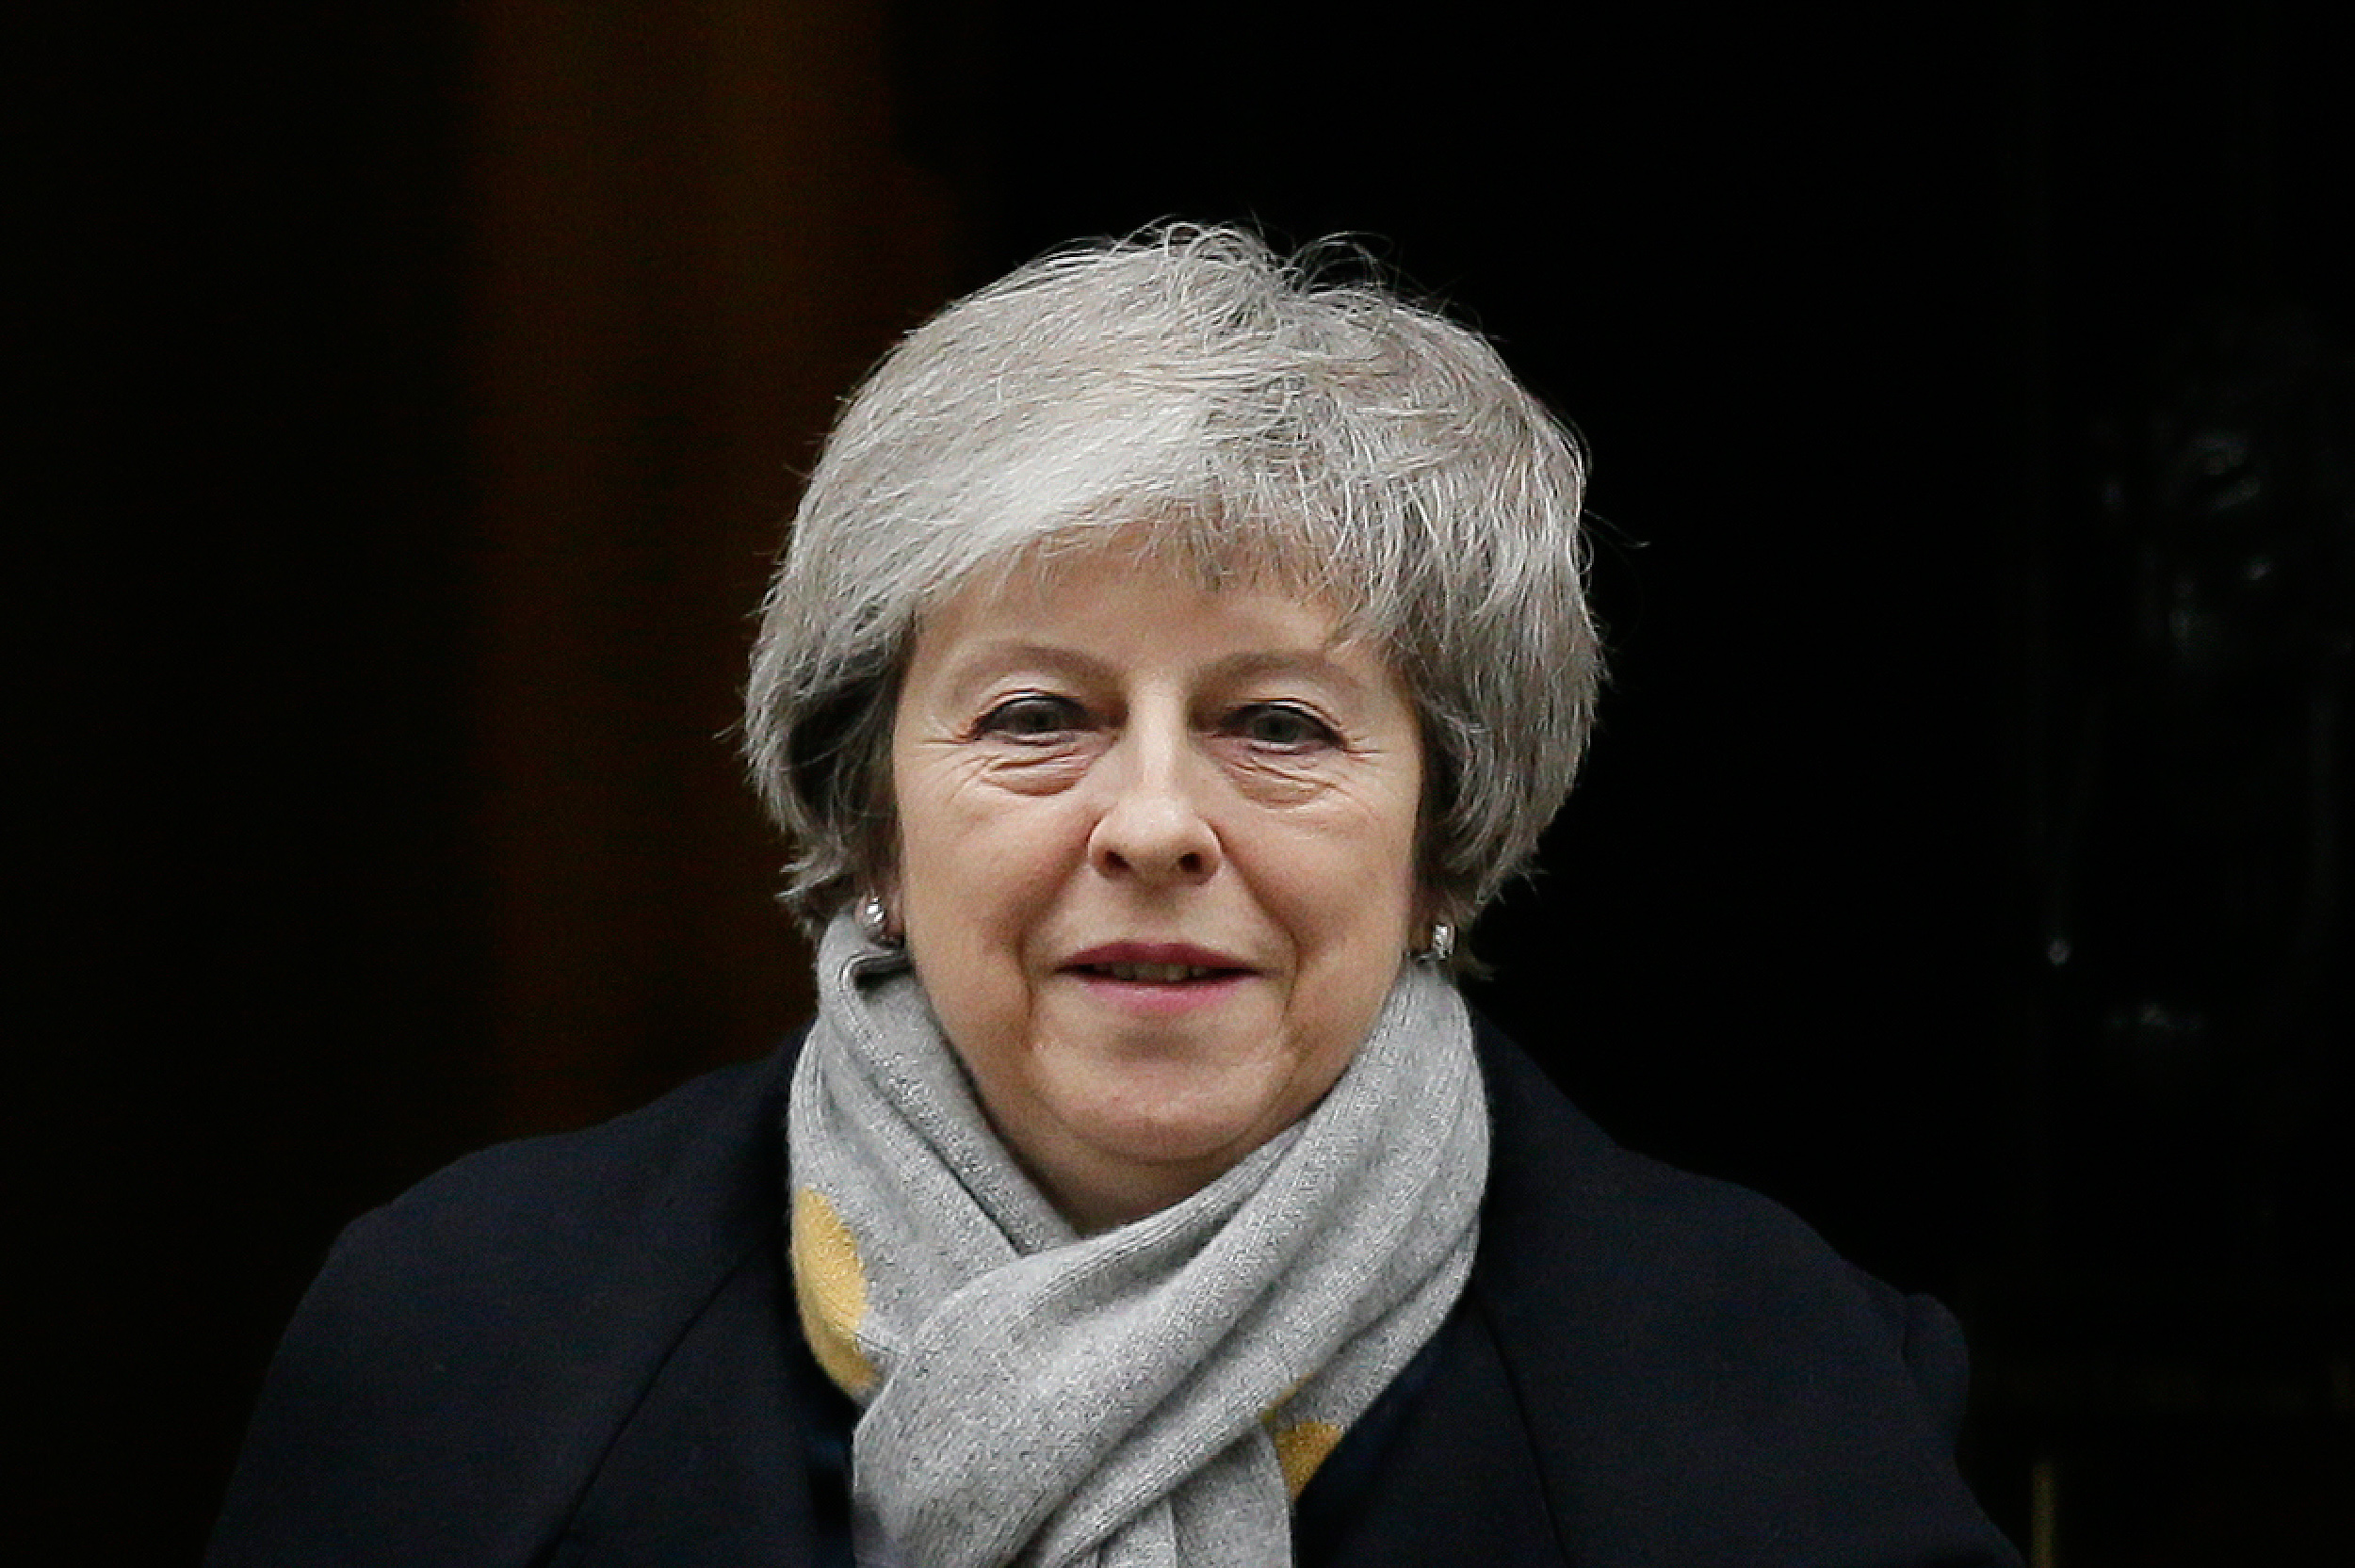 UPDATE 1-UK PM May says she will leave disappointed after Brexit failure